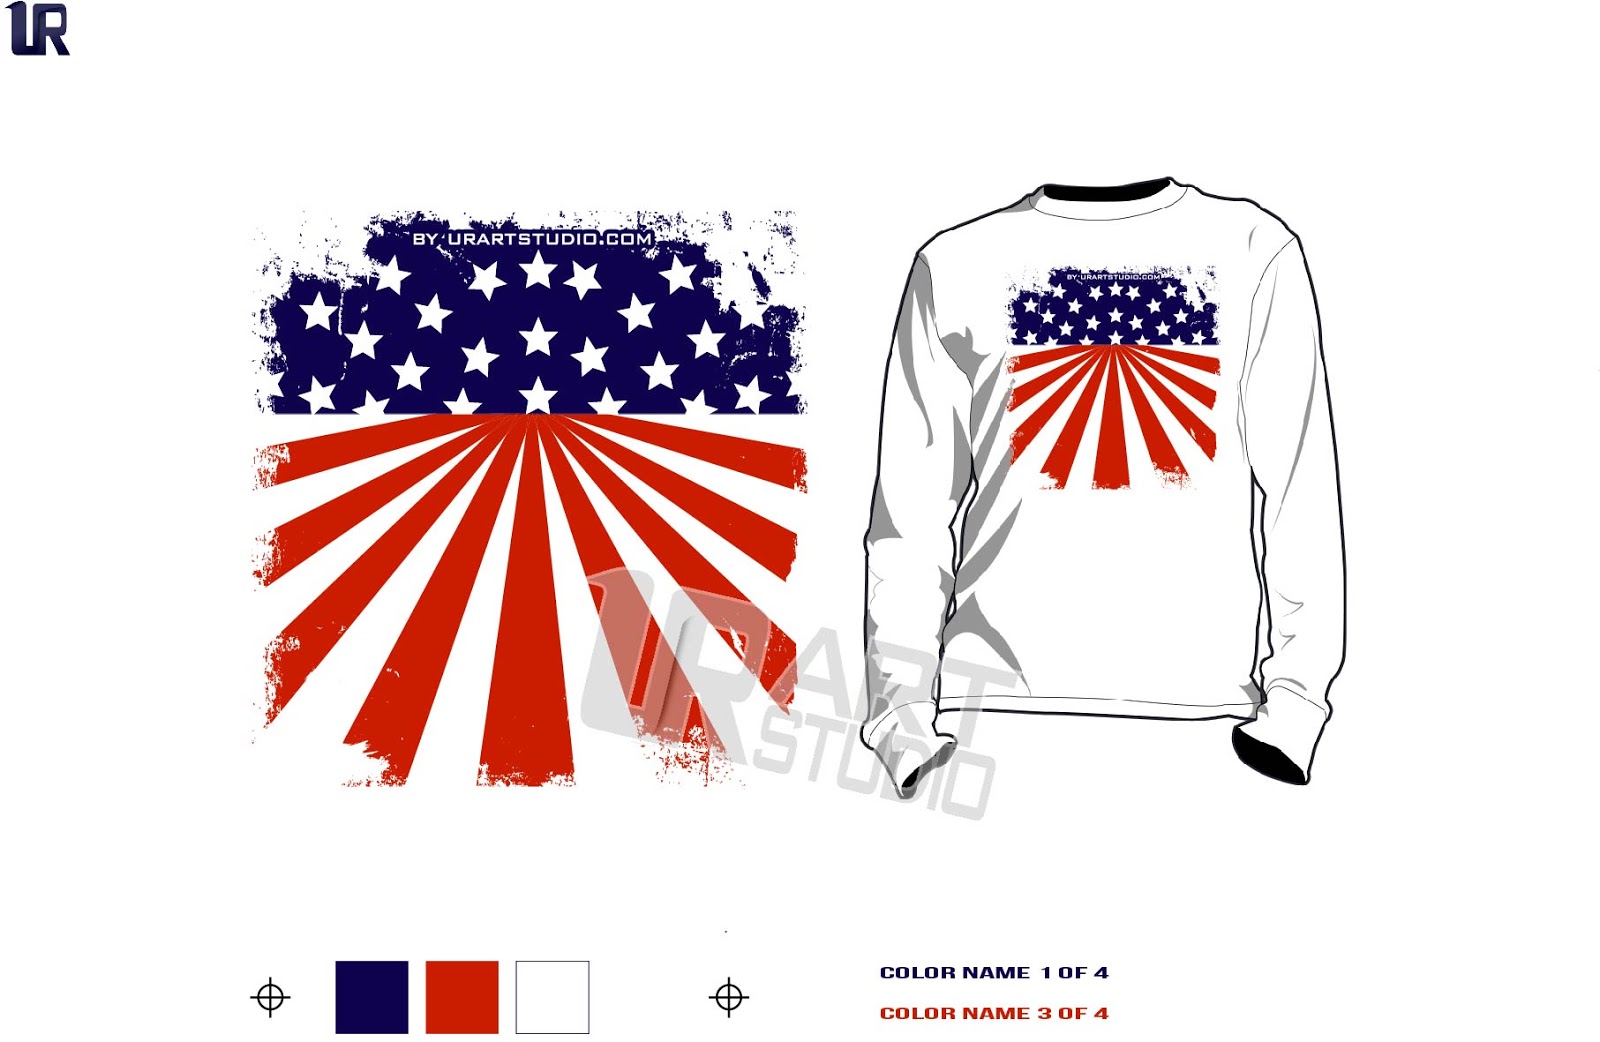 Download T-shirt logo design creative ideas: FREE DOWNLOAD Color separated AMERICAN FLAG vector design ...